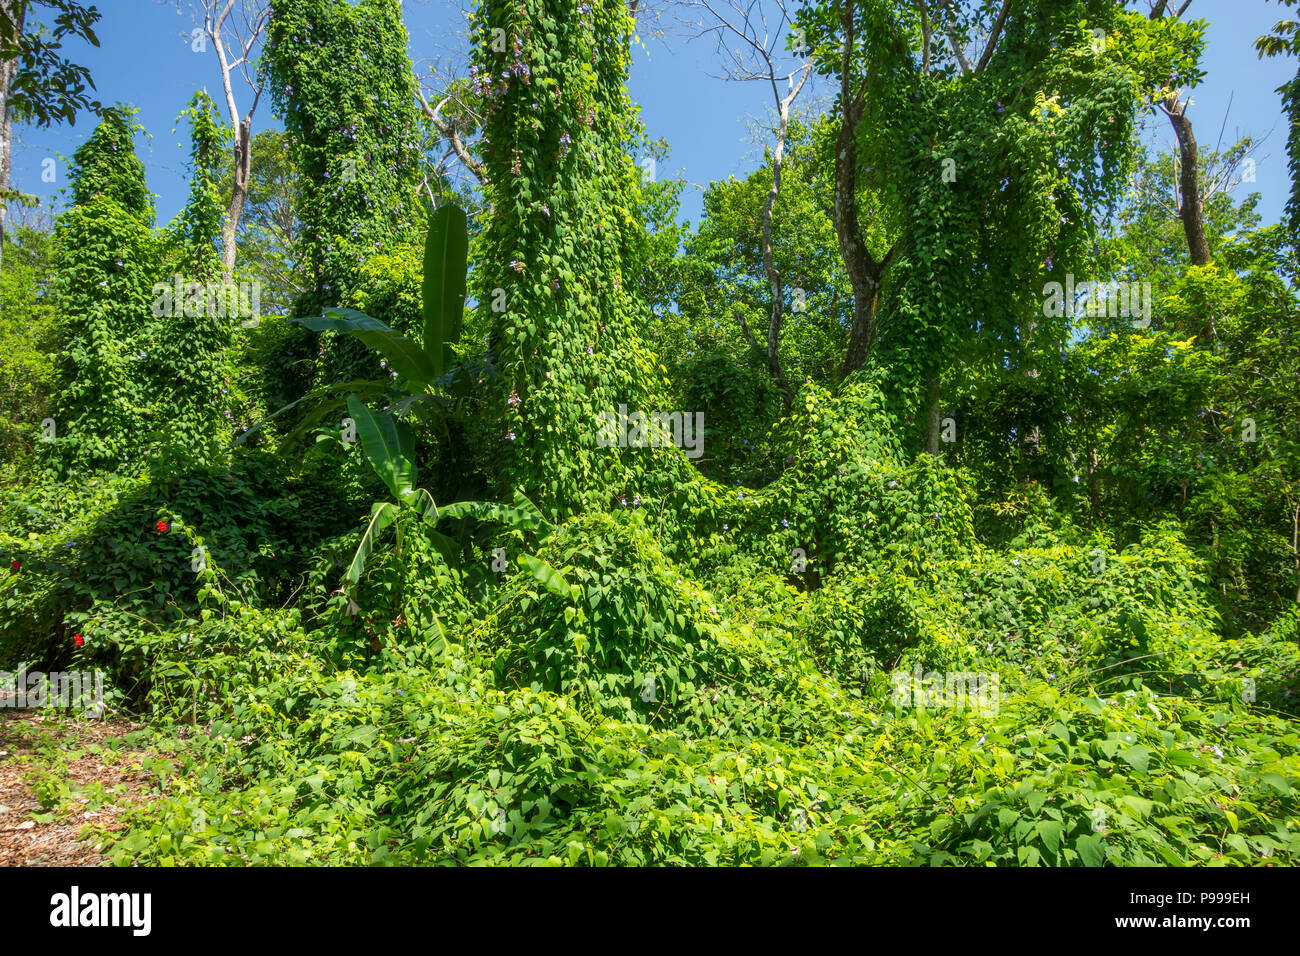 Lush Vegetation in the Rain Forest of Costa Rica Stock Photo